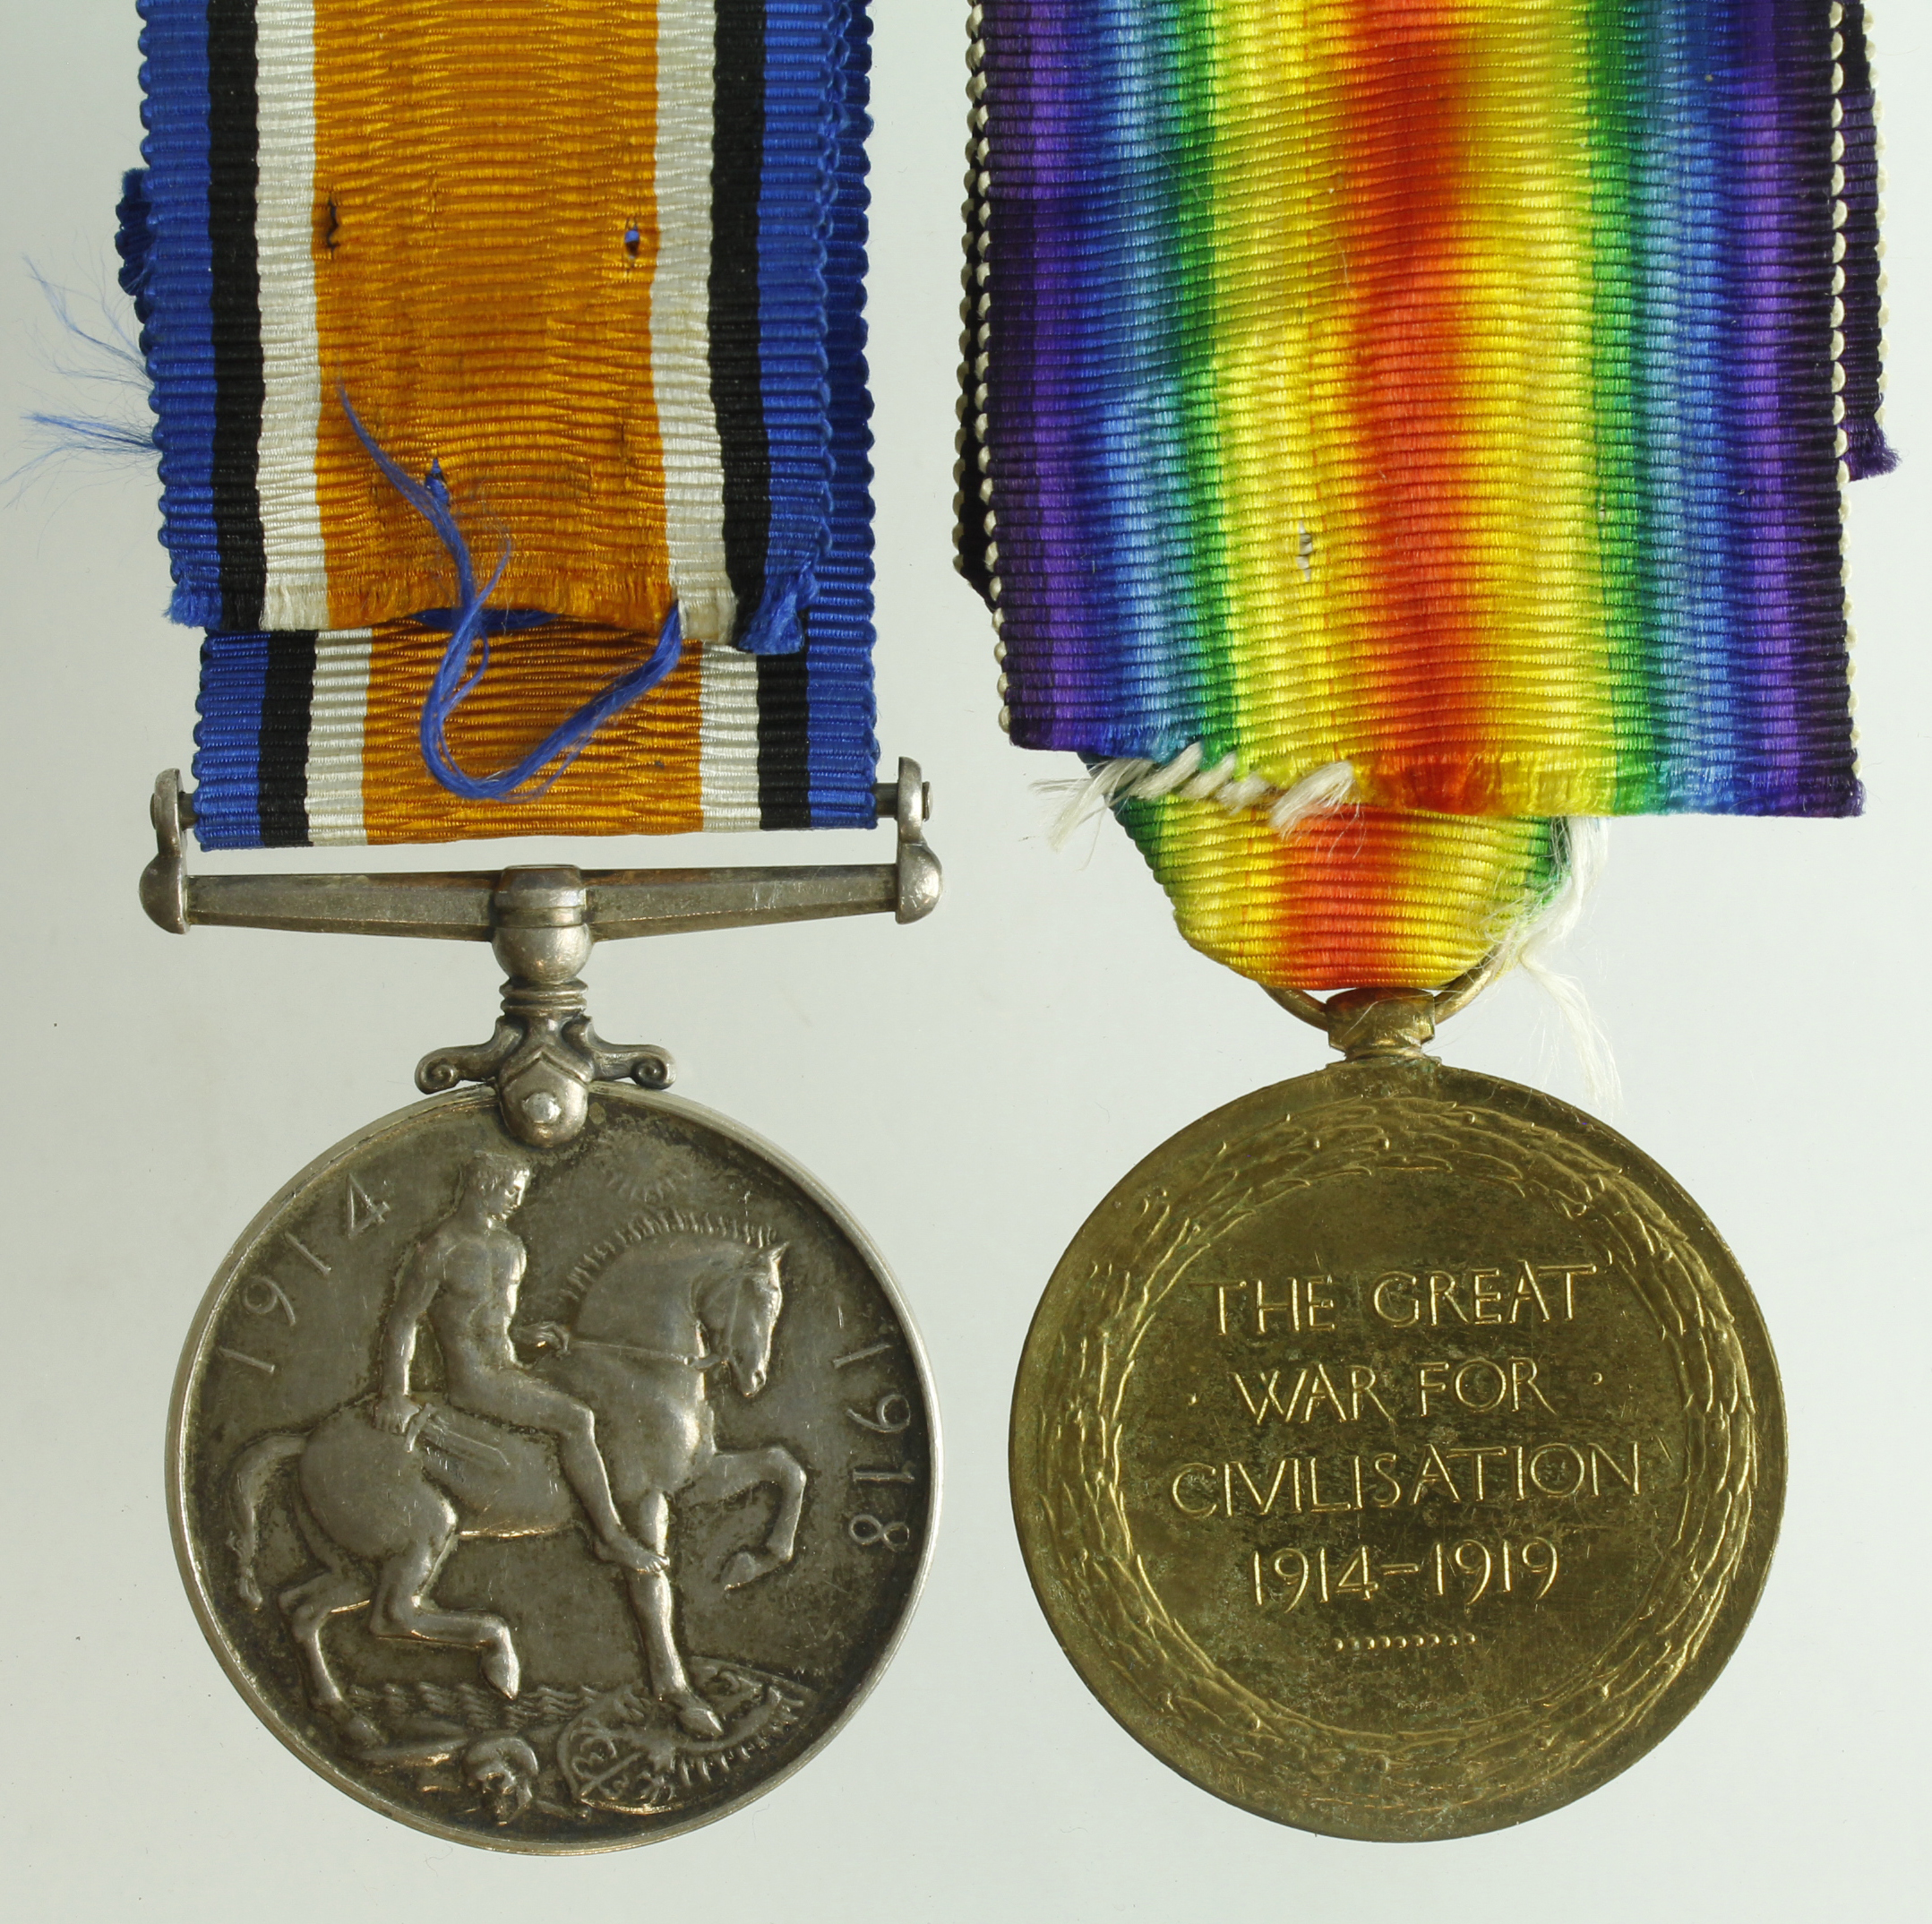 BWM & victory Medal (223 Sjt W A Ramsey Oxf & Bucks L.I.) served 1/4 Bn (missing 1915 Star) - Image 2 of 2